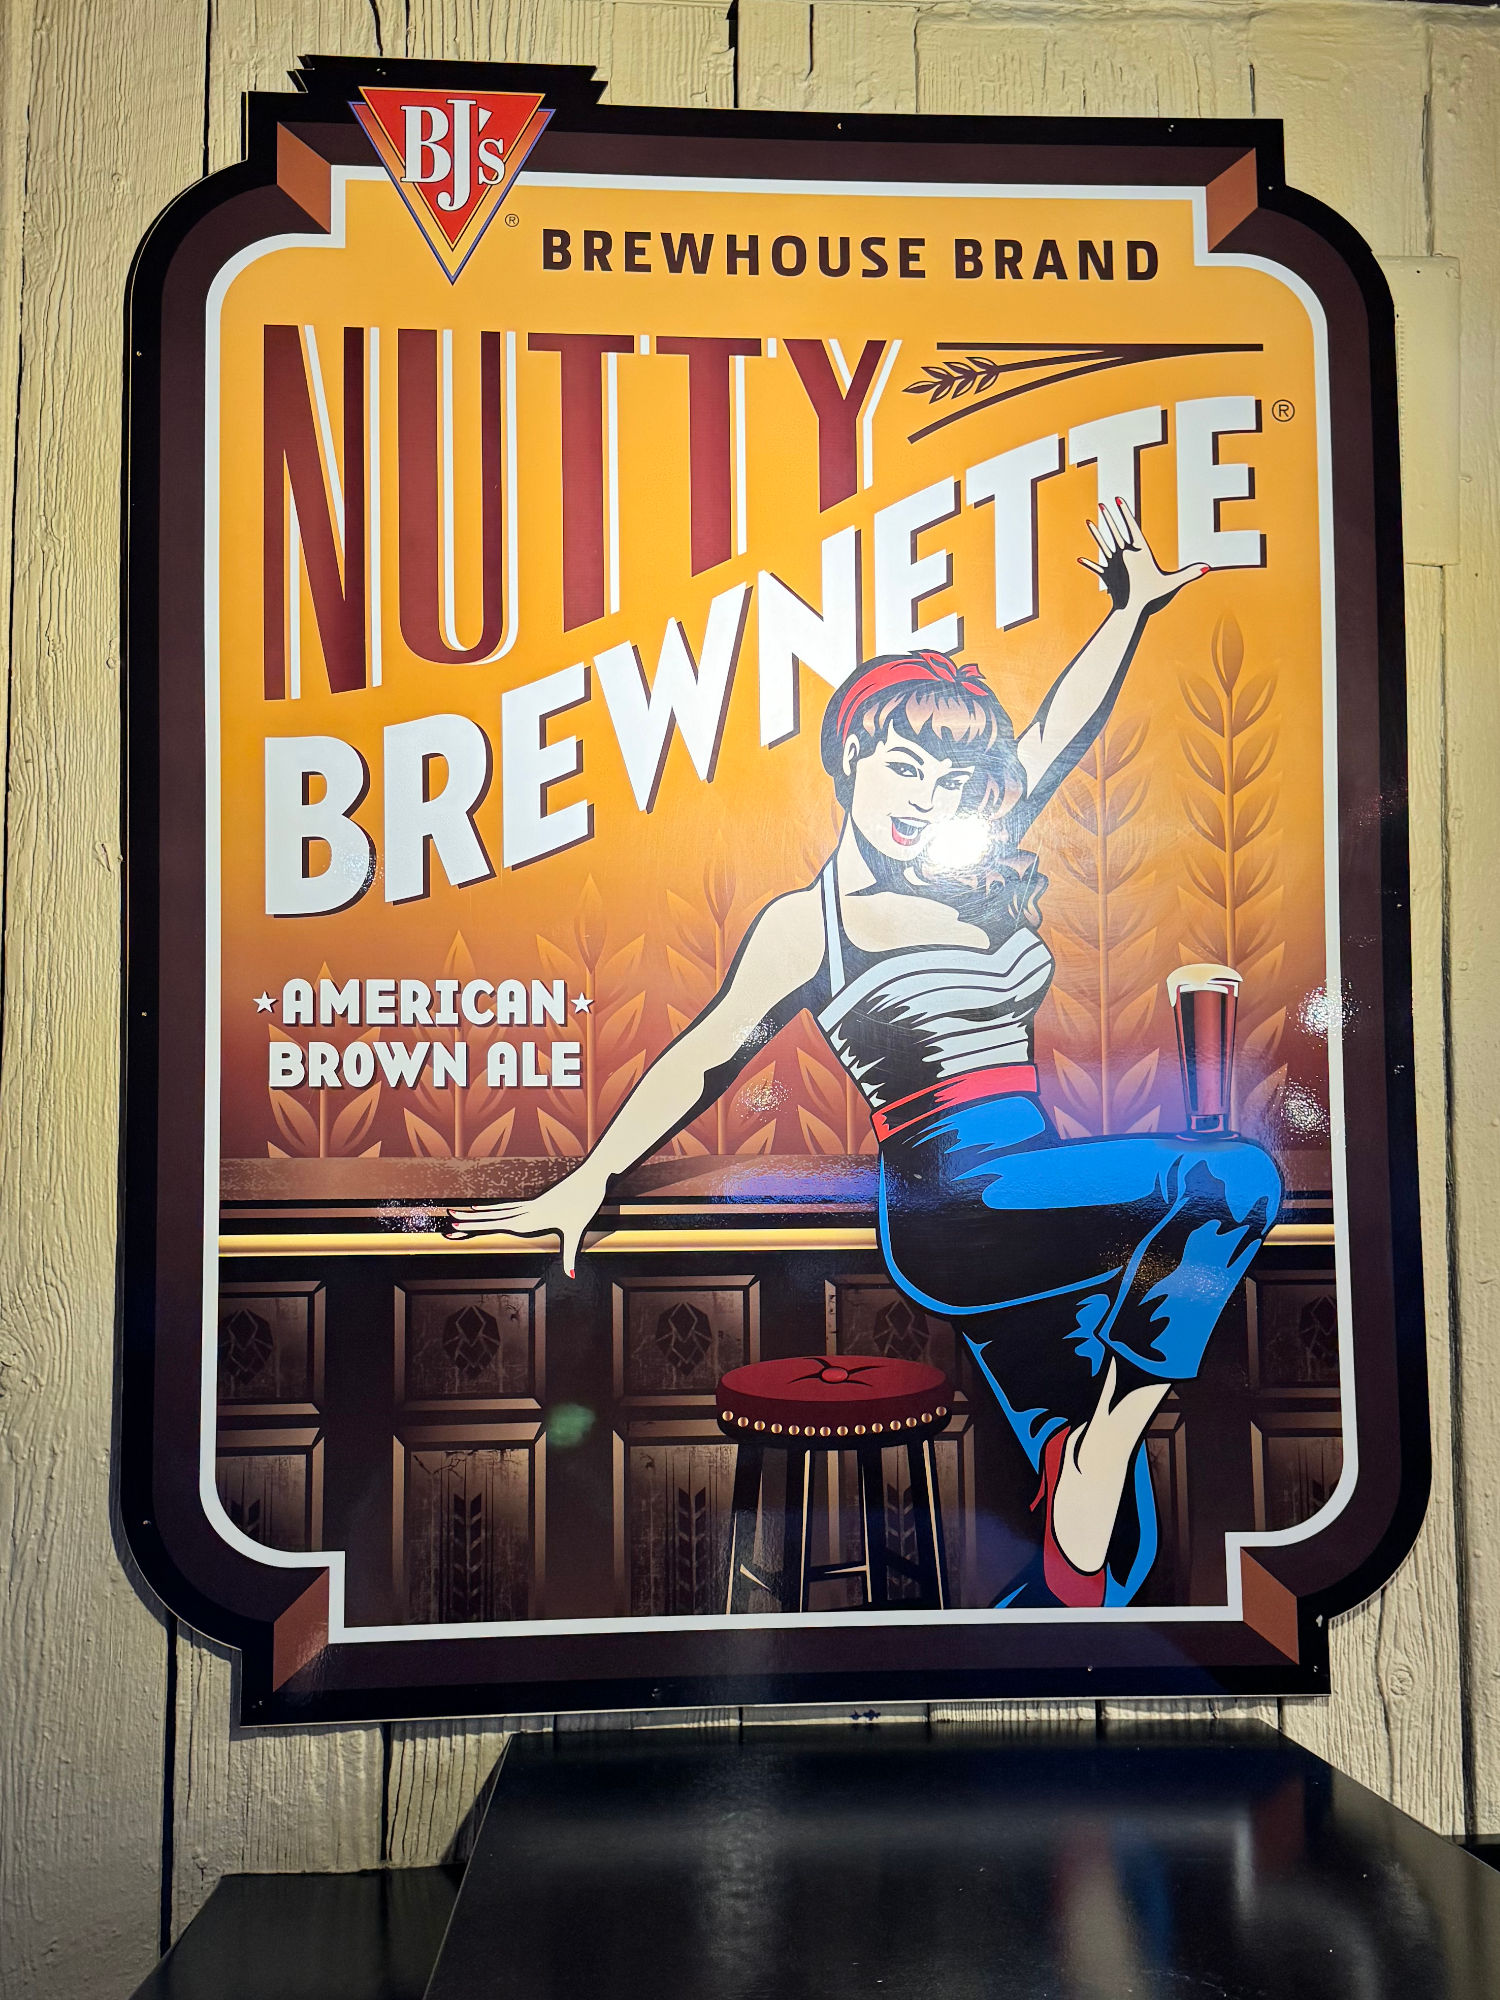 Bj's Brewhouse Nutty Brewnette